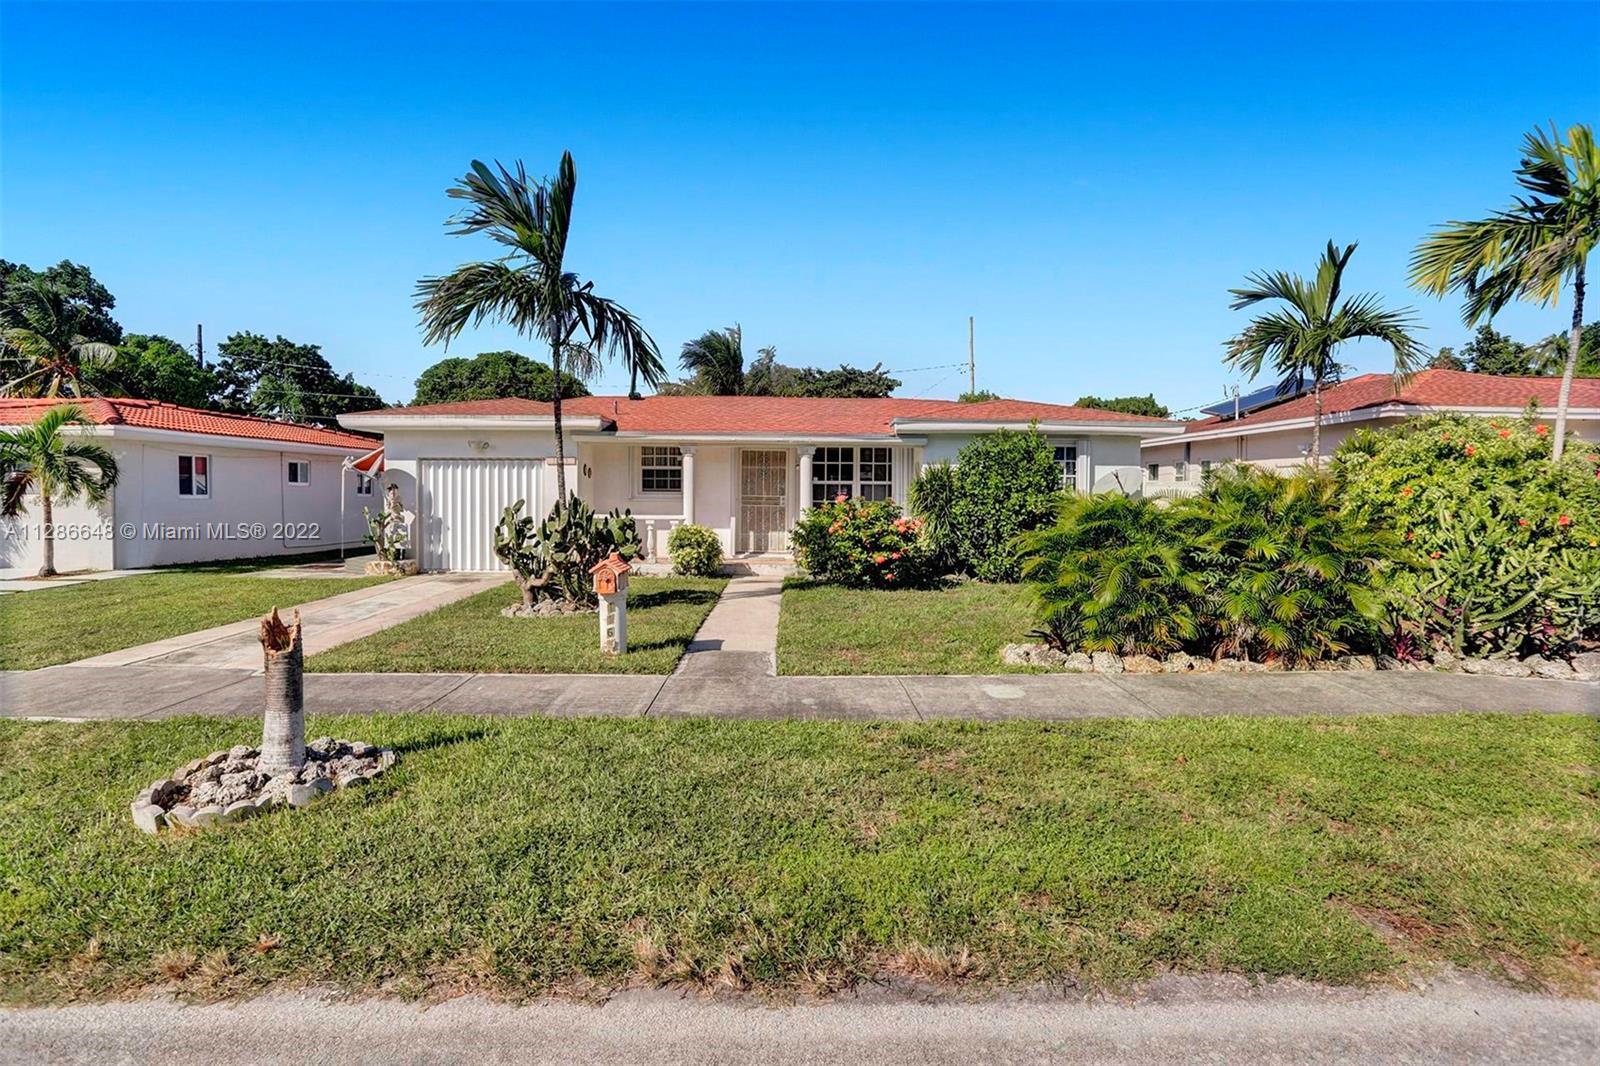 Welcome home! Centrally located and steps from the magnificent Miami Shores Golf Club, this charming